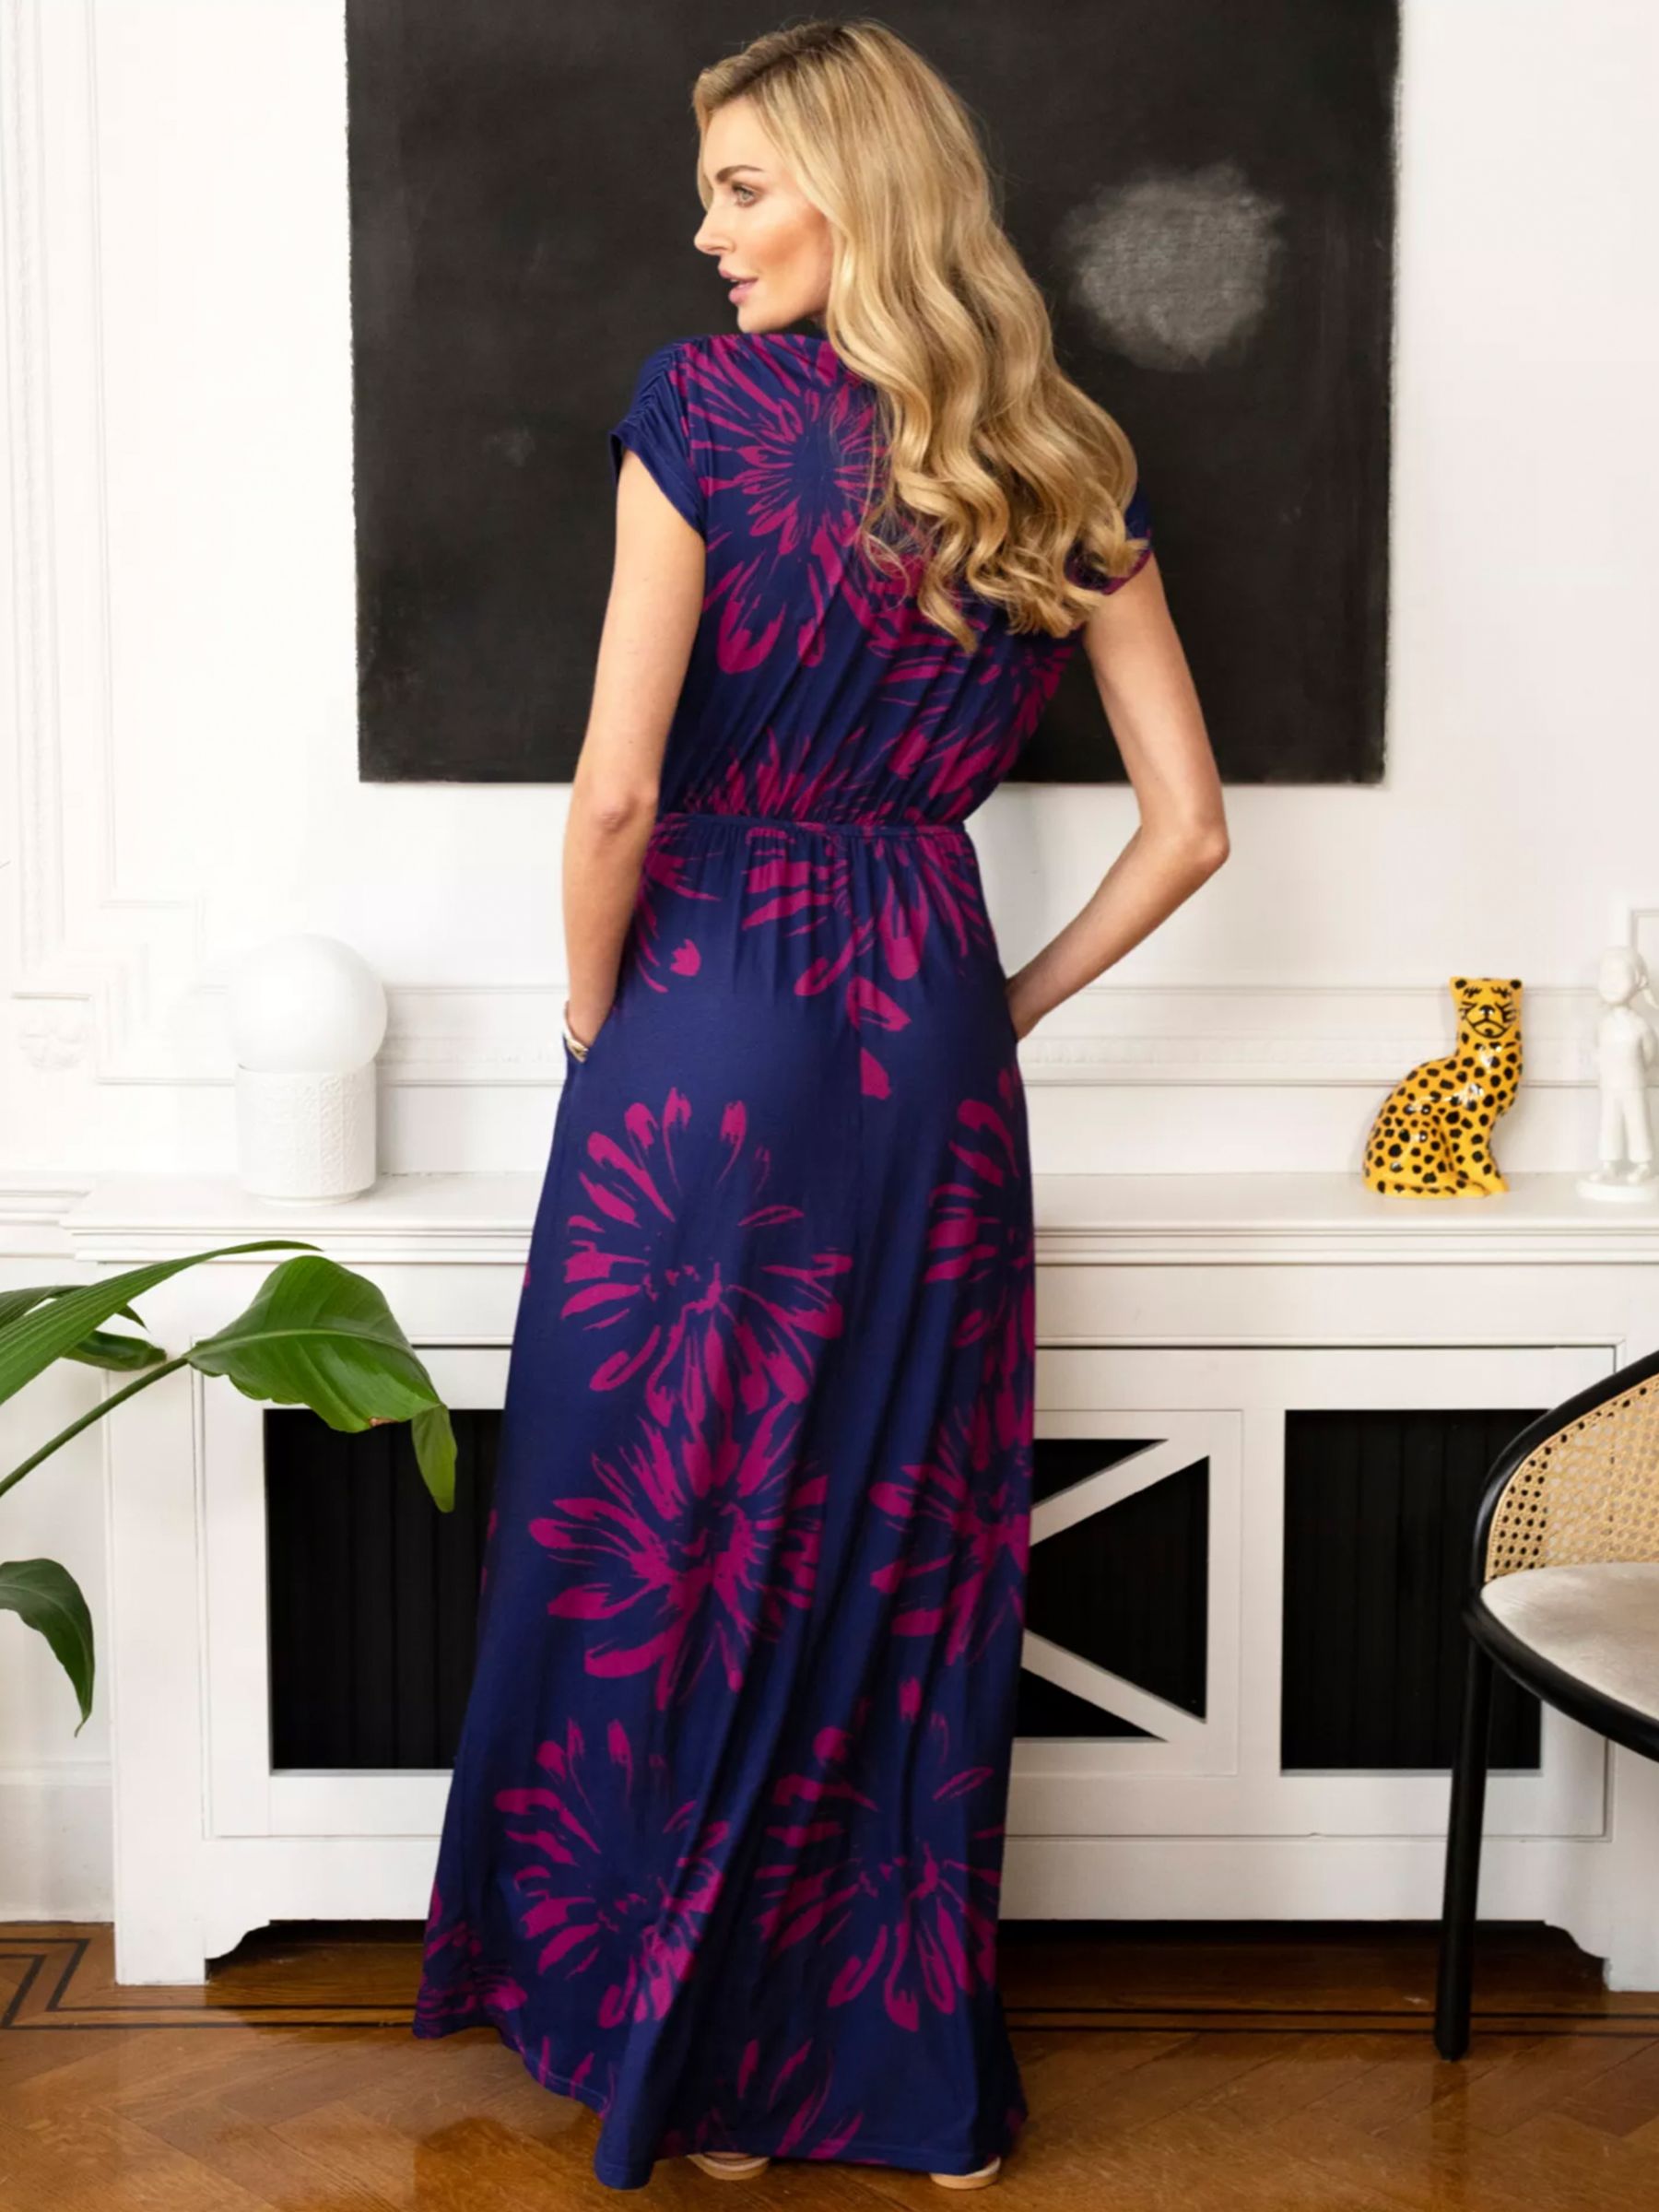 Buy HotSquash Petite Abstract Print Jersey Maxi Dress, Navy/Pink Online at johnlewis.com